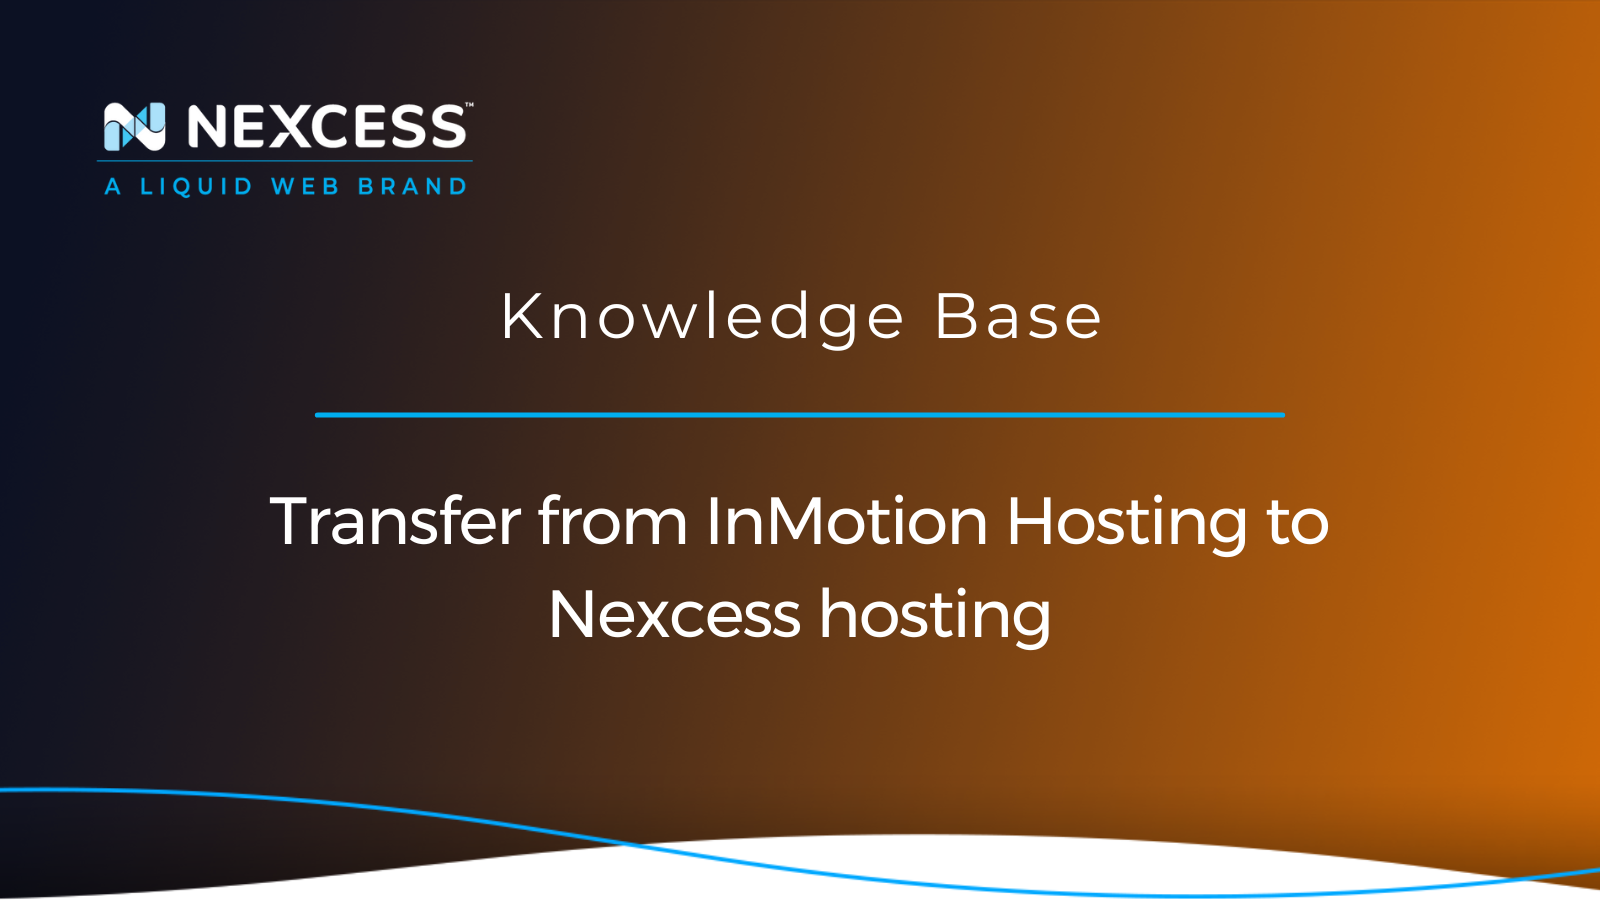 Transfer from InMotion Hosting to Nexcess hosting